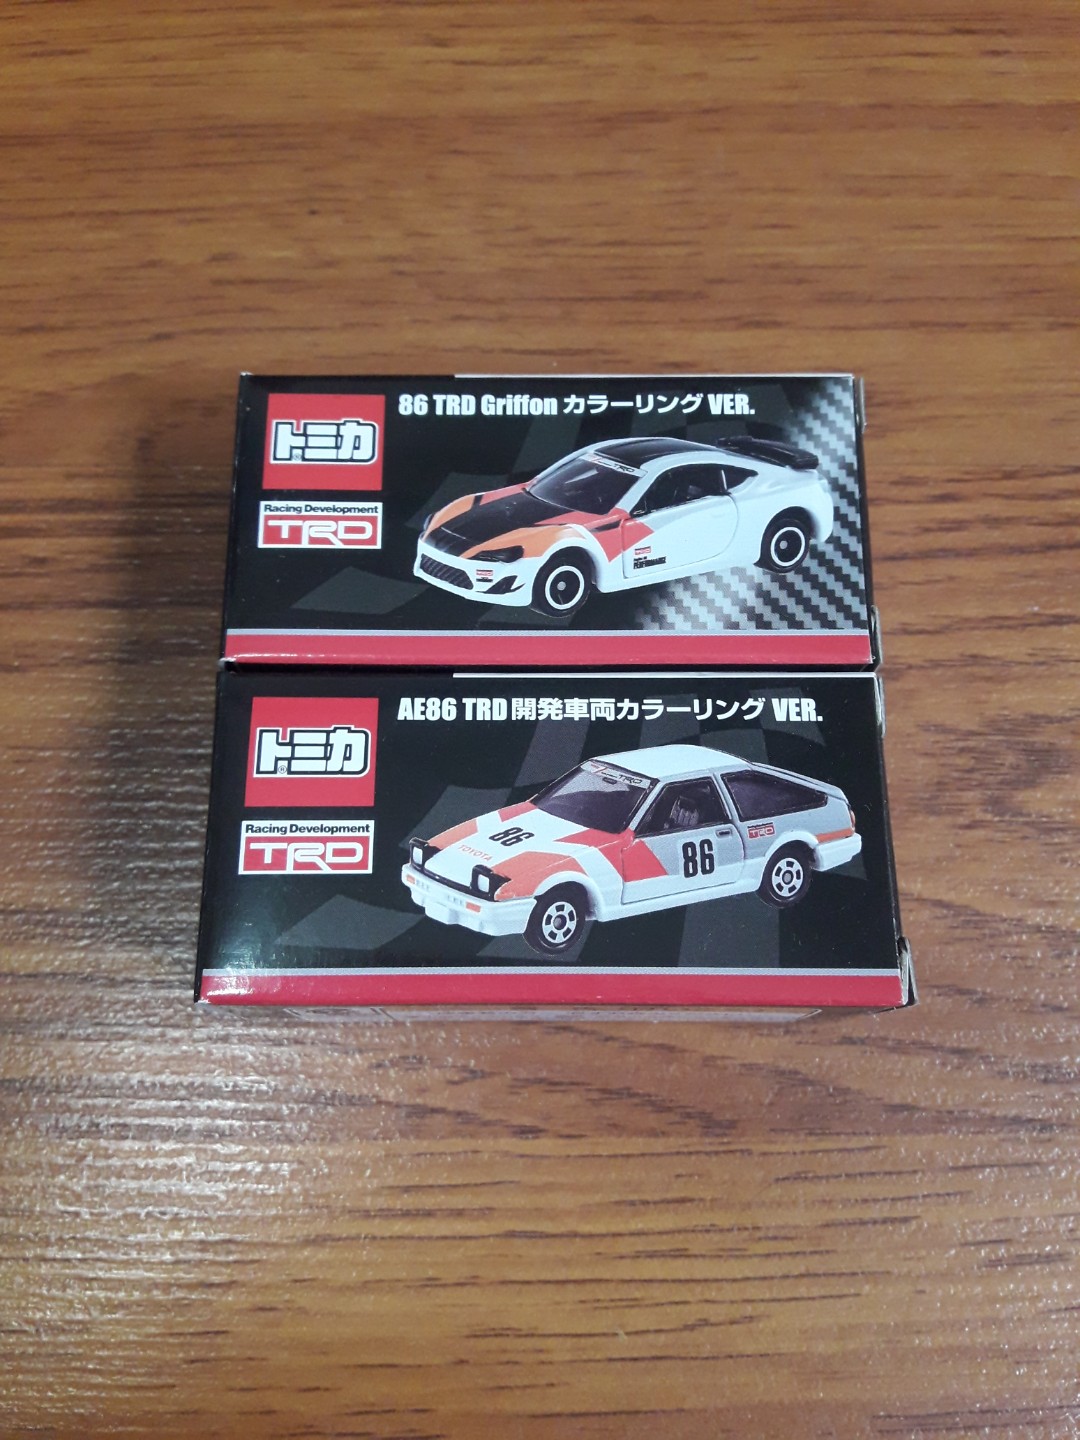 Tomica TRD GT86 and AE86, Hobbies  Toys, Toys  Games on Carousell